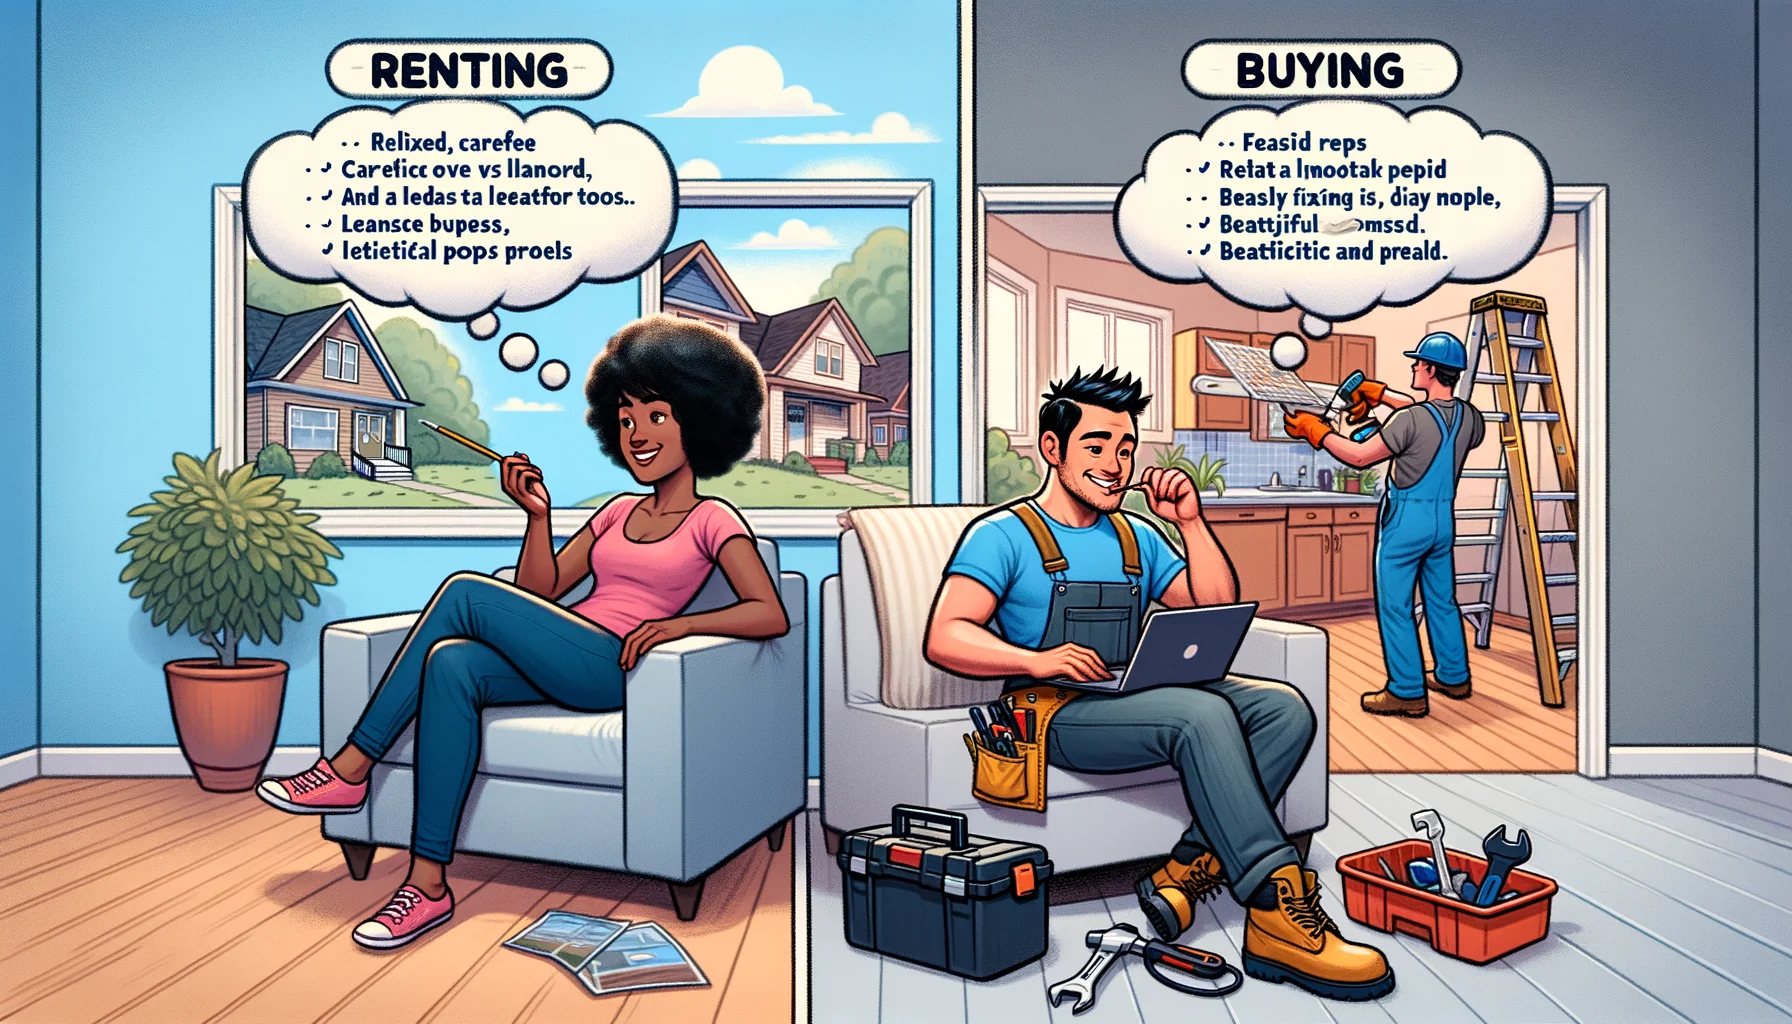 Create a humorous, realistic approach to the age-old debate: renting vs. buying. Display two side-by-side scenes for comparison. On the left, show a relaxed, carefree renter, a black woman in her 20s, sitting on a couch, casually using her laptop, with a landlord fixing a leaky ceiling. On the right, show a focused home-buyer, an Asian man in his 30s, with a tool belt, tackling a DIY project in his beautiful living room with satisfaction and pride. Embed friendly thought bubbles over each that list the idealistic pros of their situation.